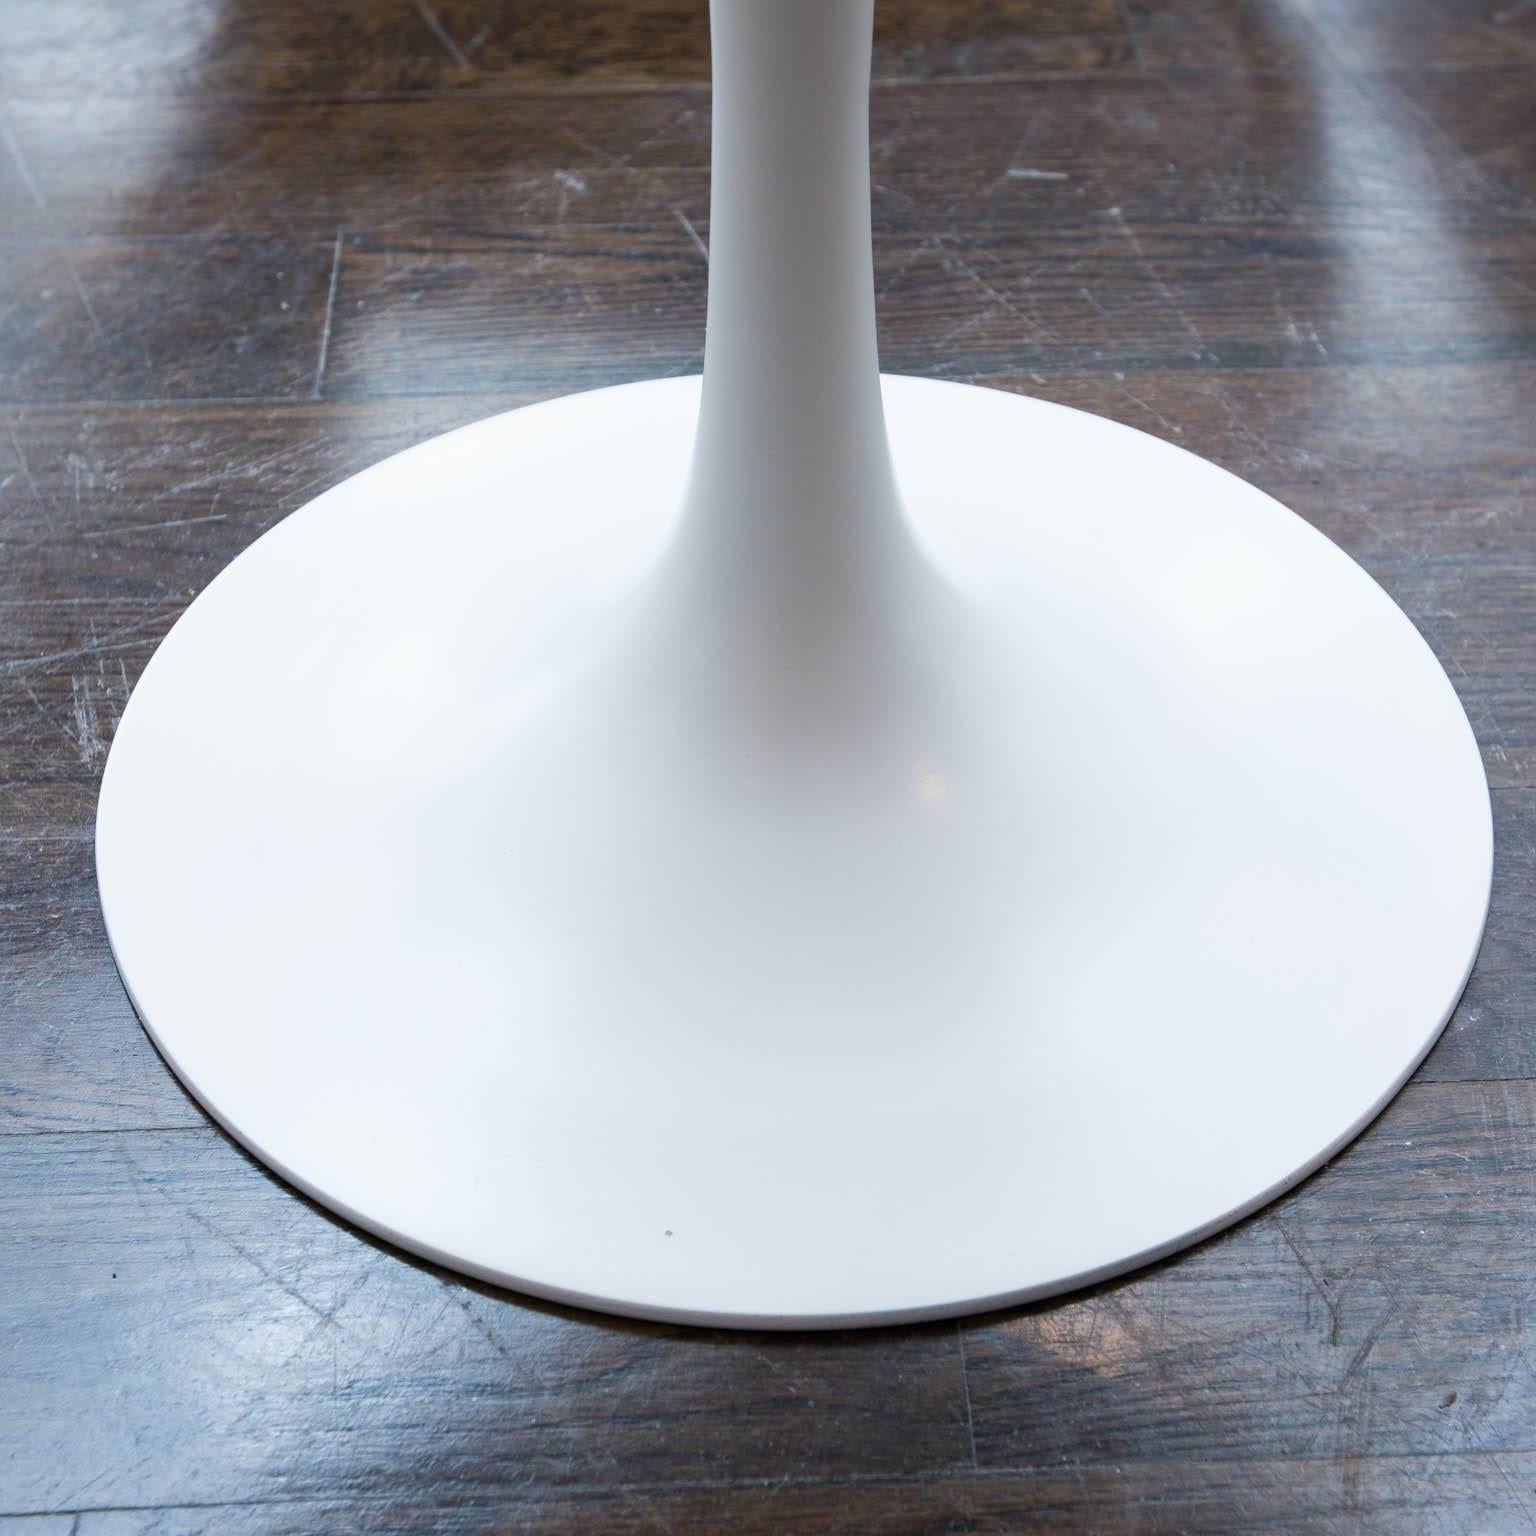 Tulip table that's been refinished in satin white lacquer. Measures: 24 inch diameter.